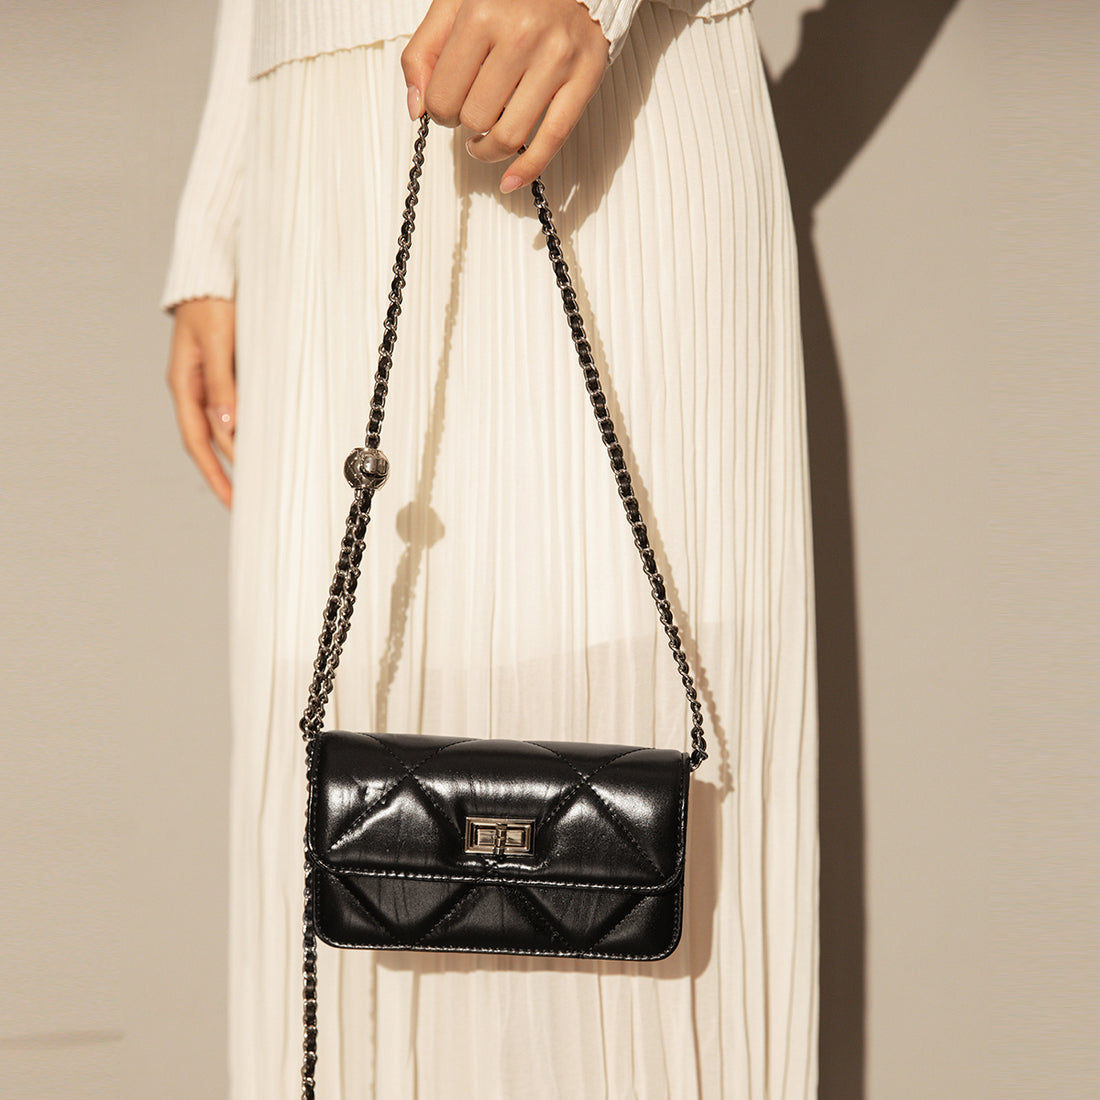 black-quilted-chain-strap-bag_all_1.jpg